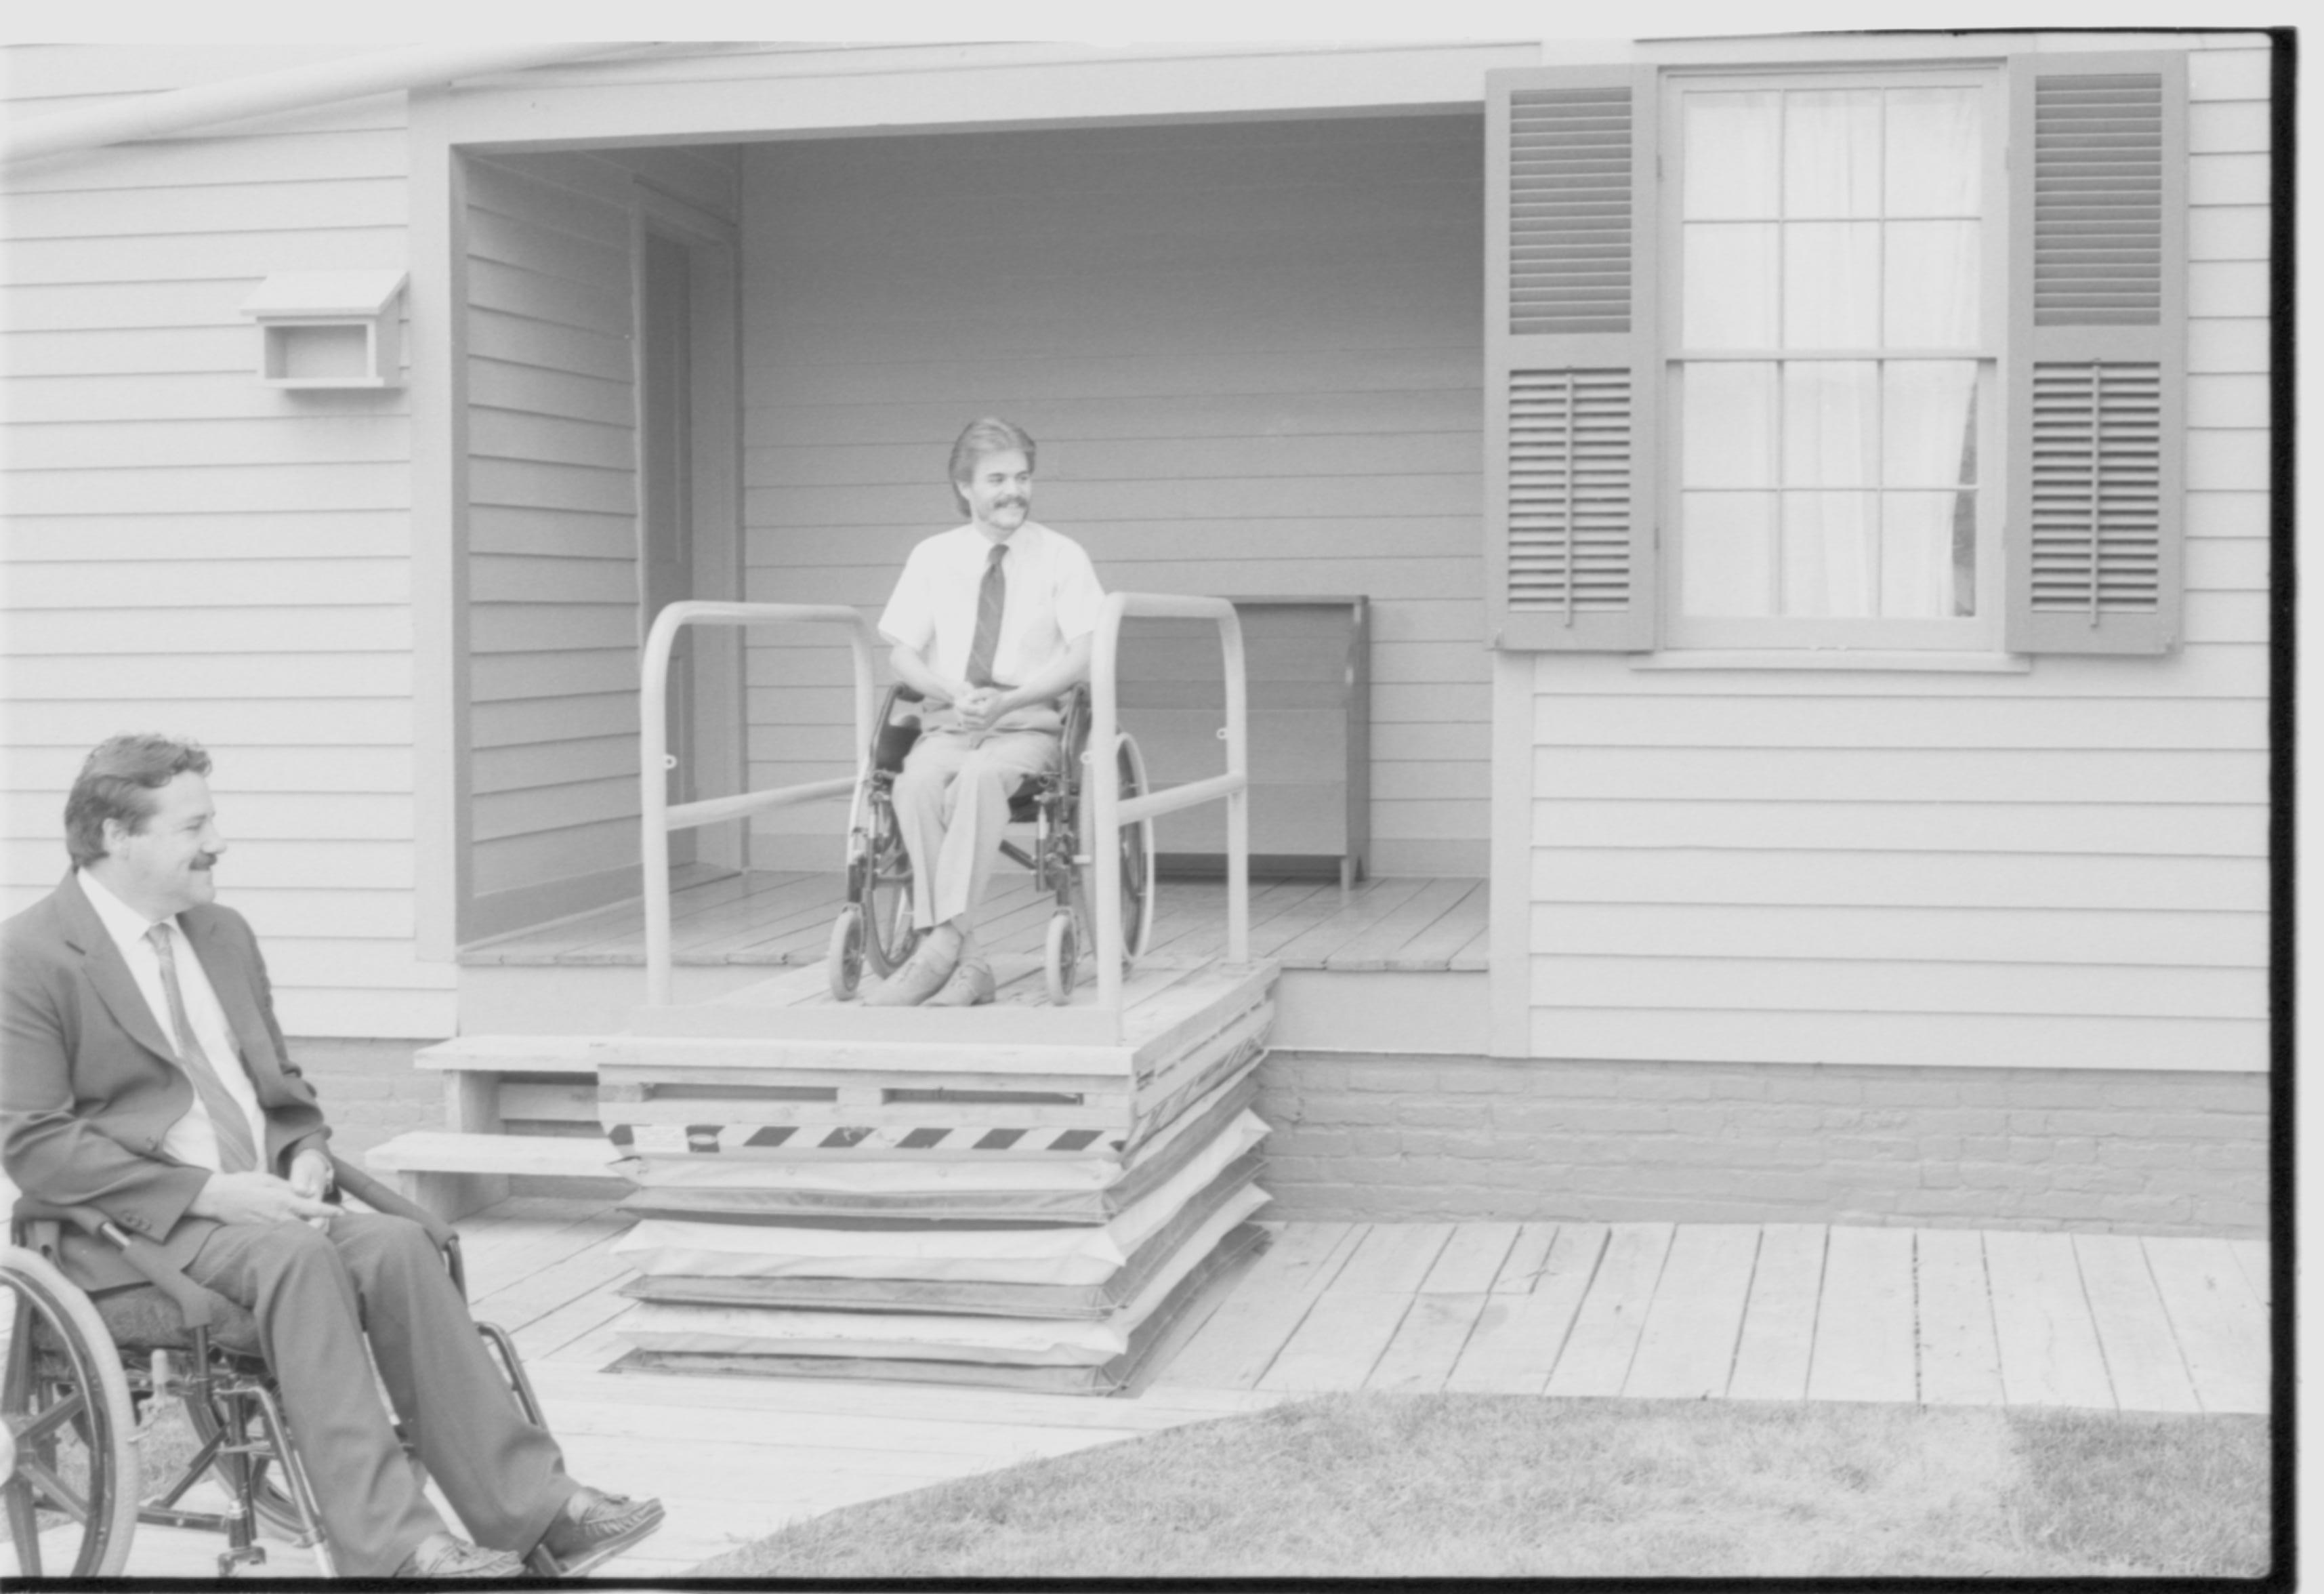 Lincoln Home wheelchair lift, at full height. One man in wheelchair on lift, facing away from Lincoln Home, with second man in wheelchair at ground level. Photographer facing south west.